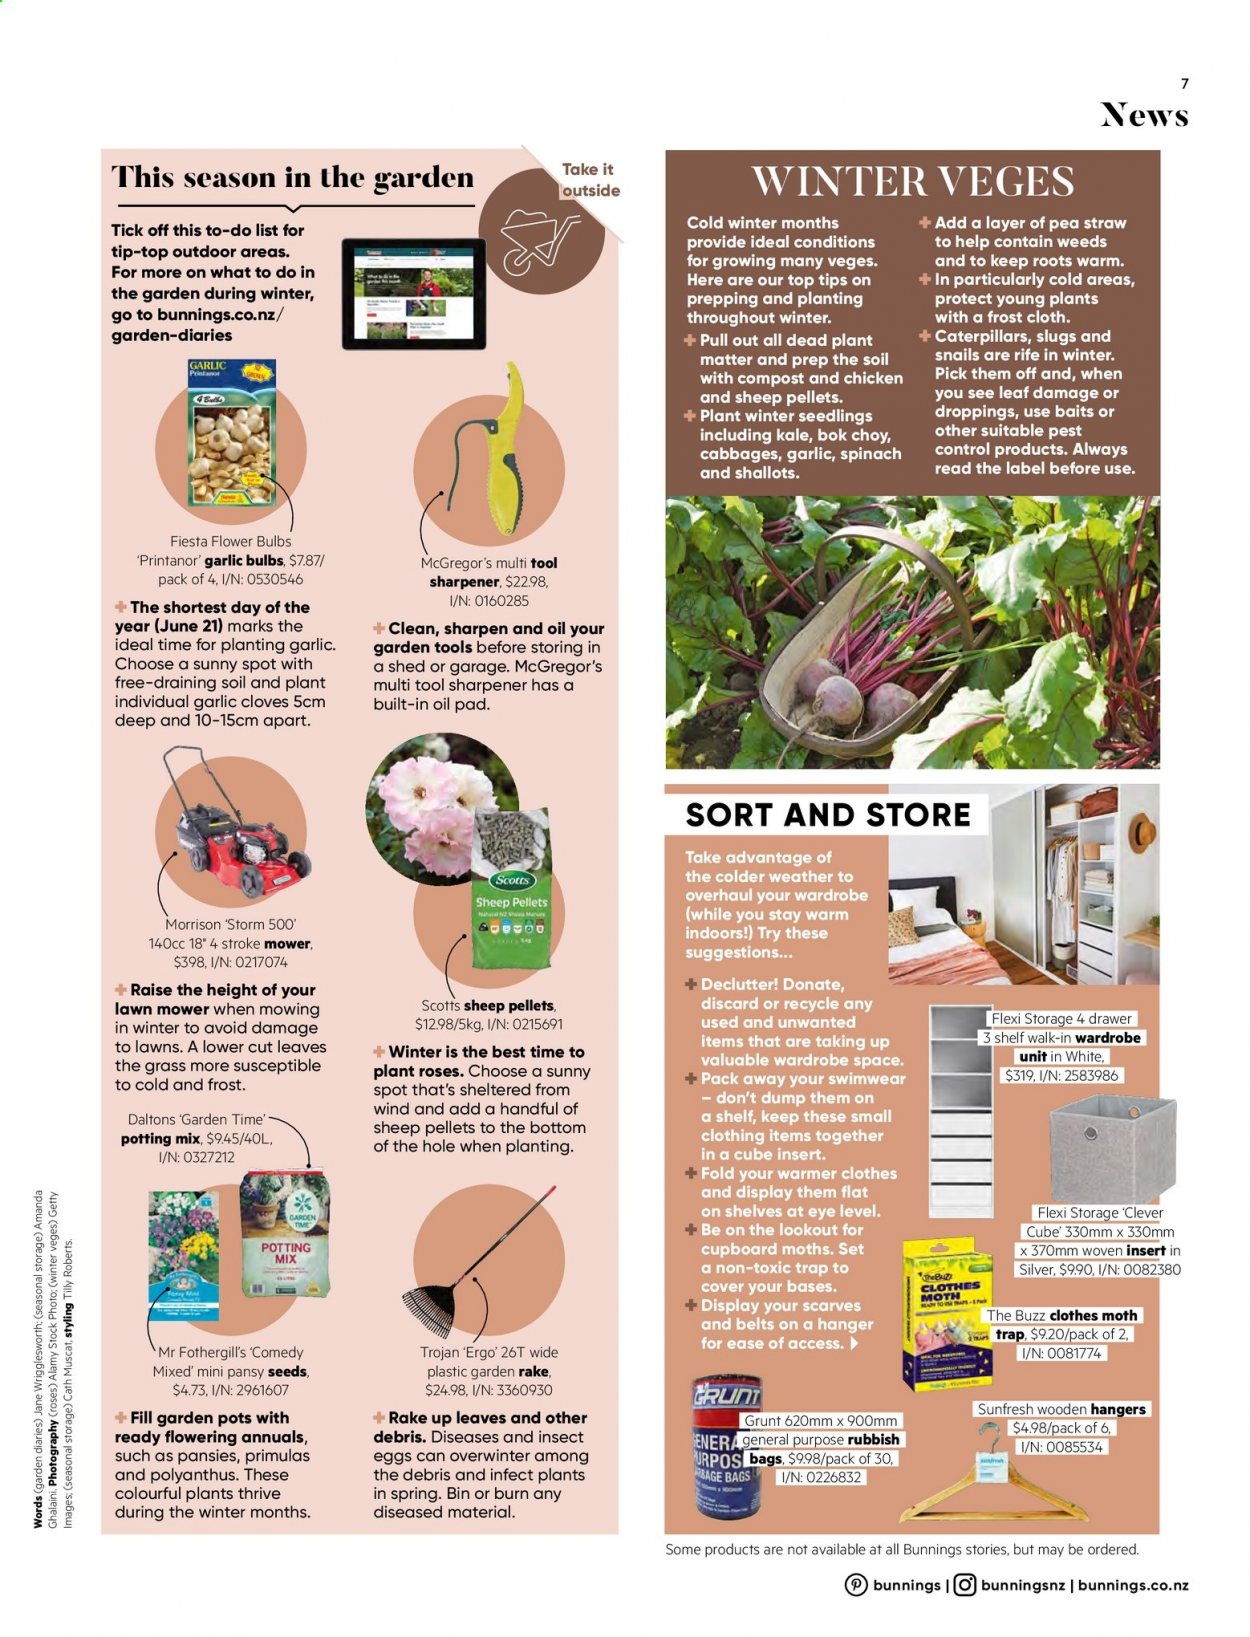 thumbnail - Bunnings Warehouse mailer - Sales products - wardrobe, lawn mower, gardening tools, shed, rose, potting mix, compost. Page 7.